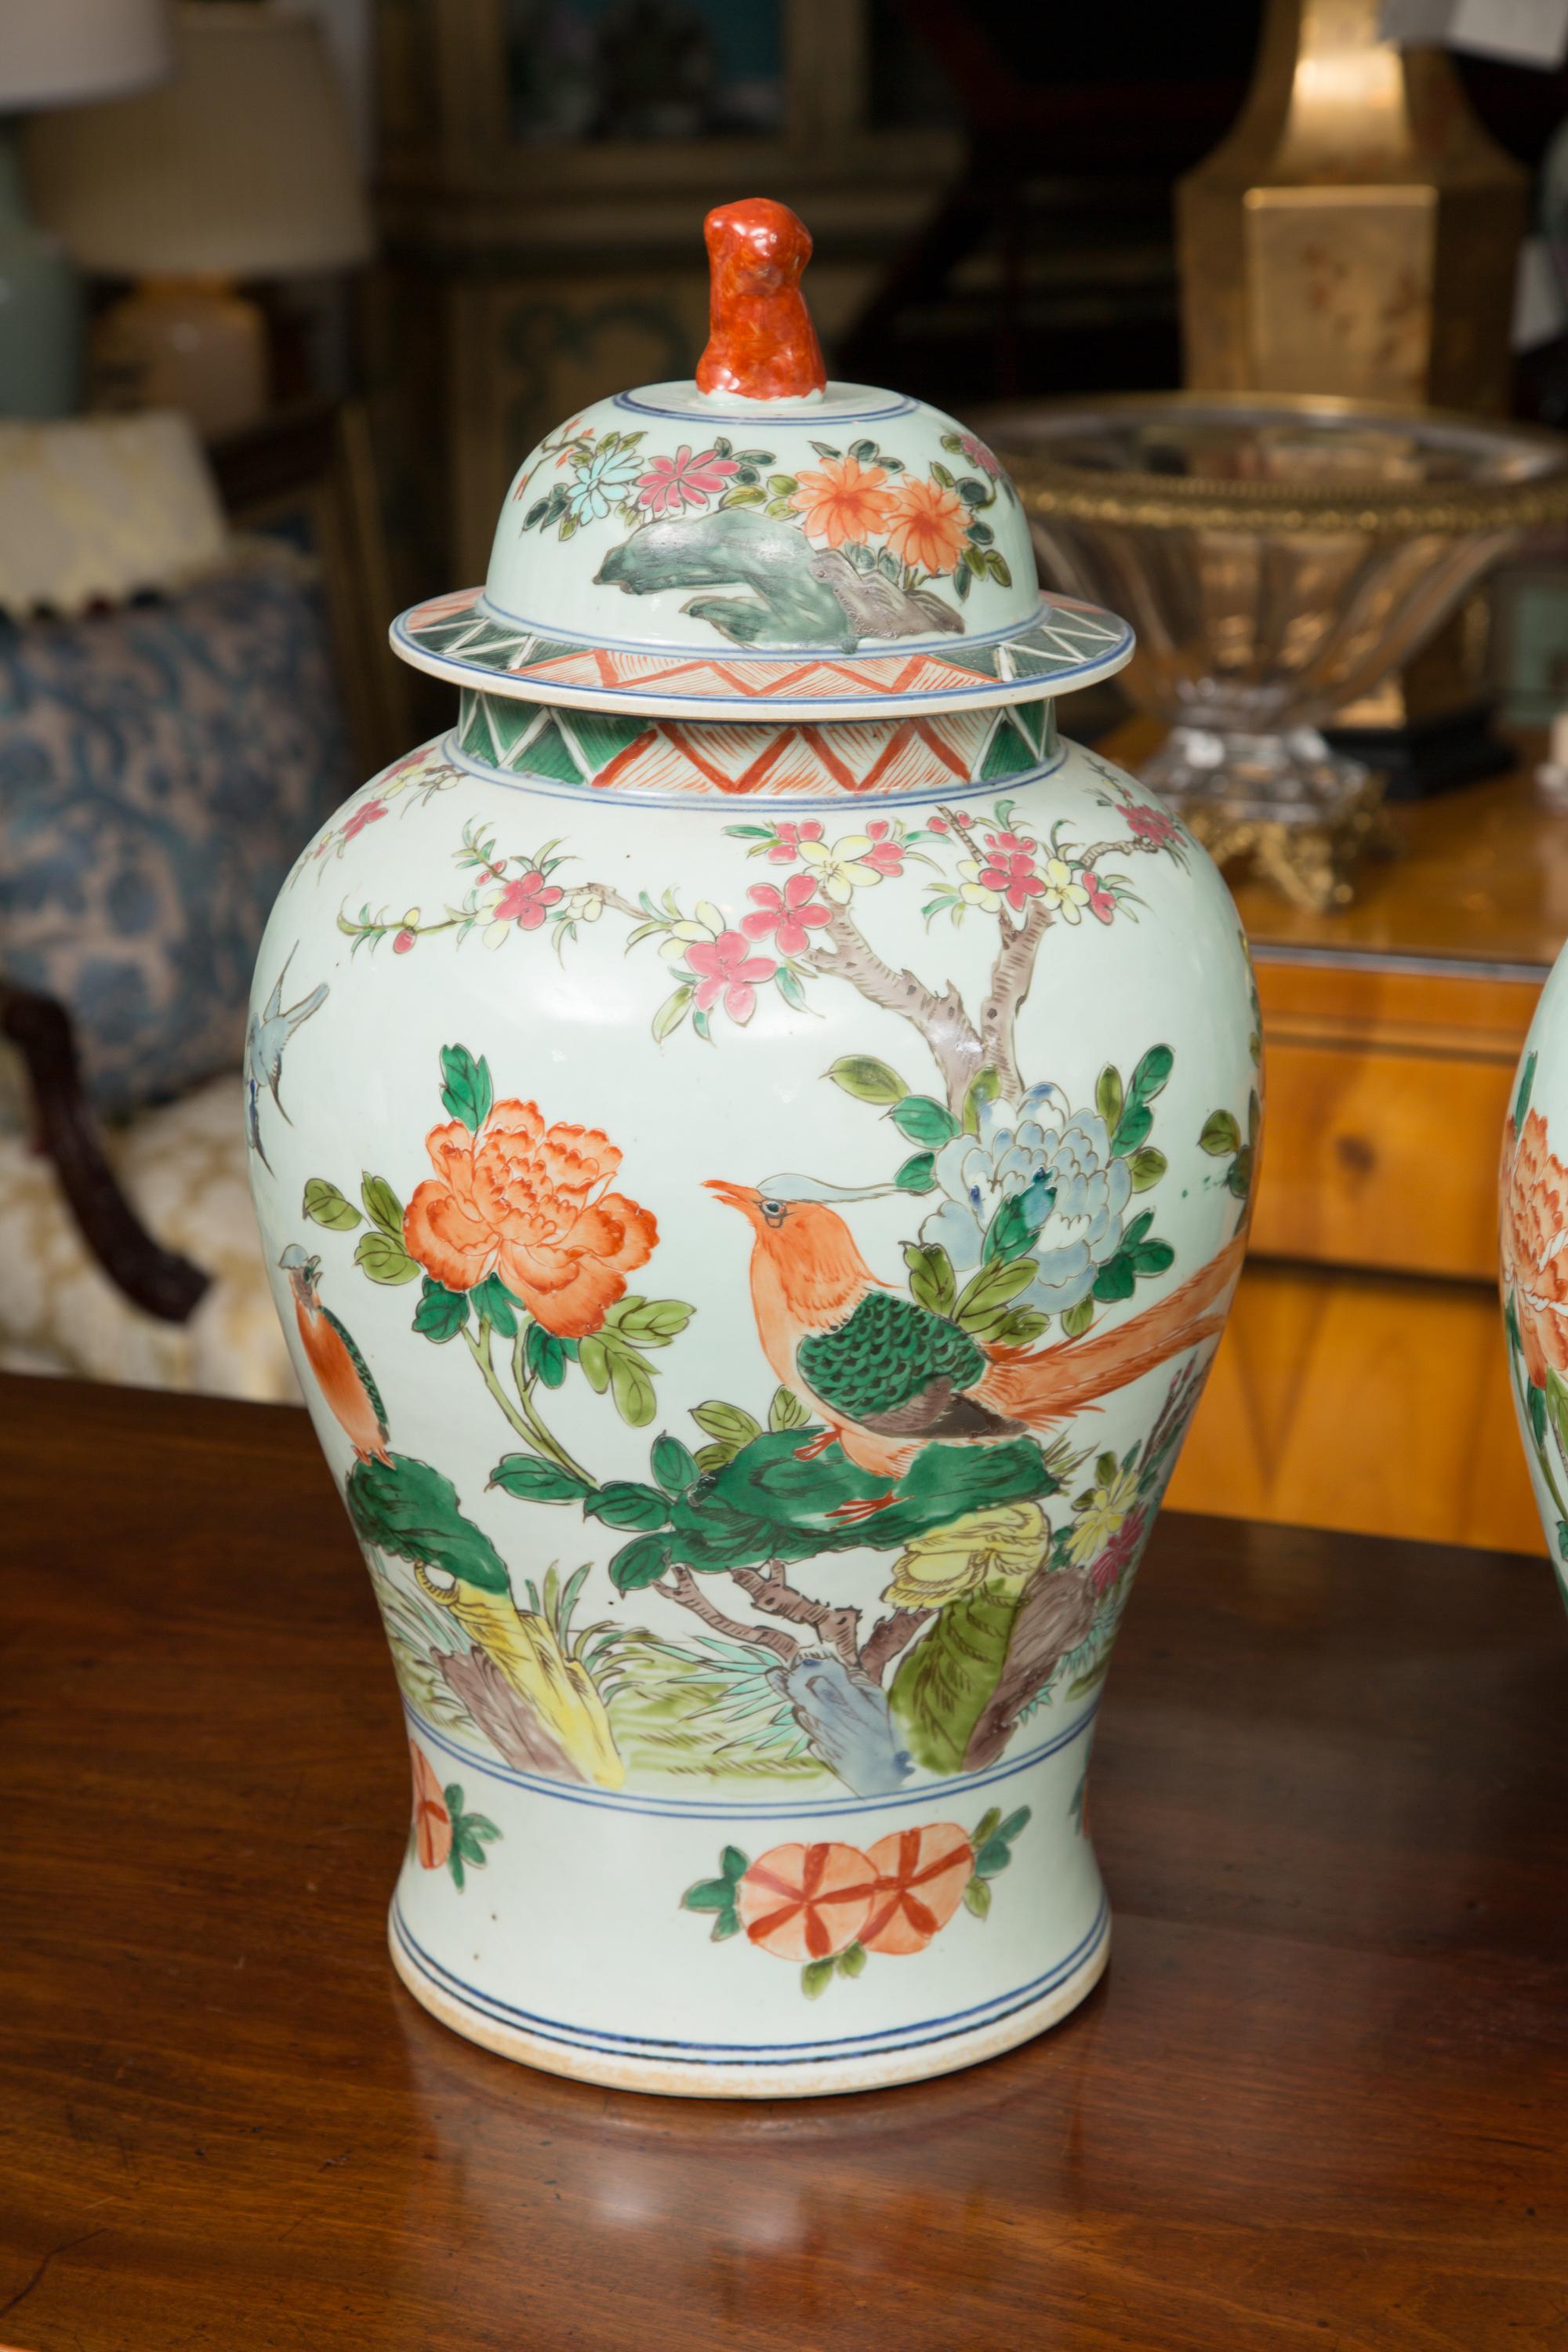 These are a pleasant near pair of celadon lidded urns with a Classic scene of birds and flowers. The deep green, yellow and tangerine colors all blend for a sophisticated home accent, 20th century.